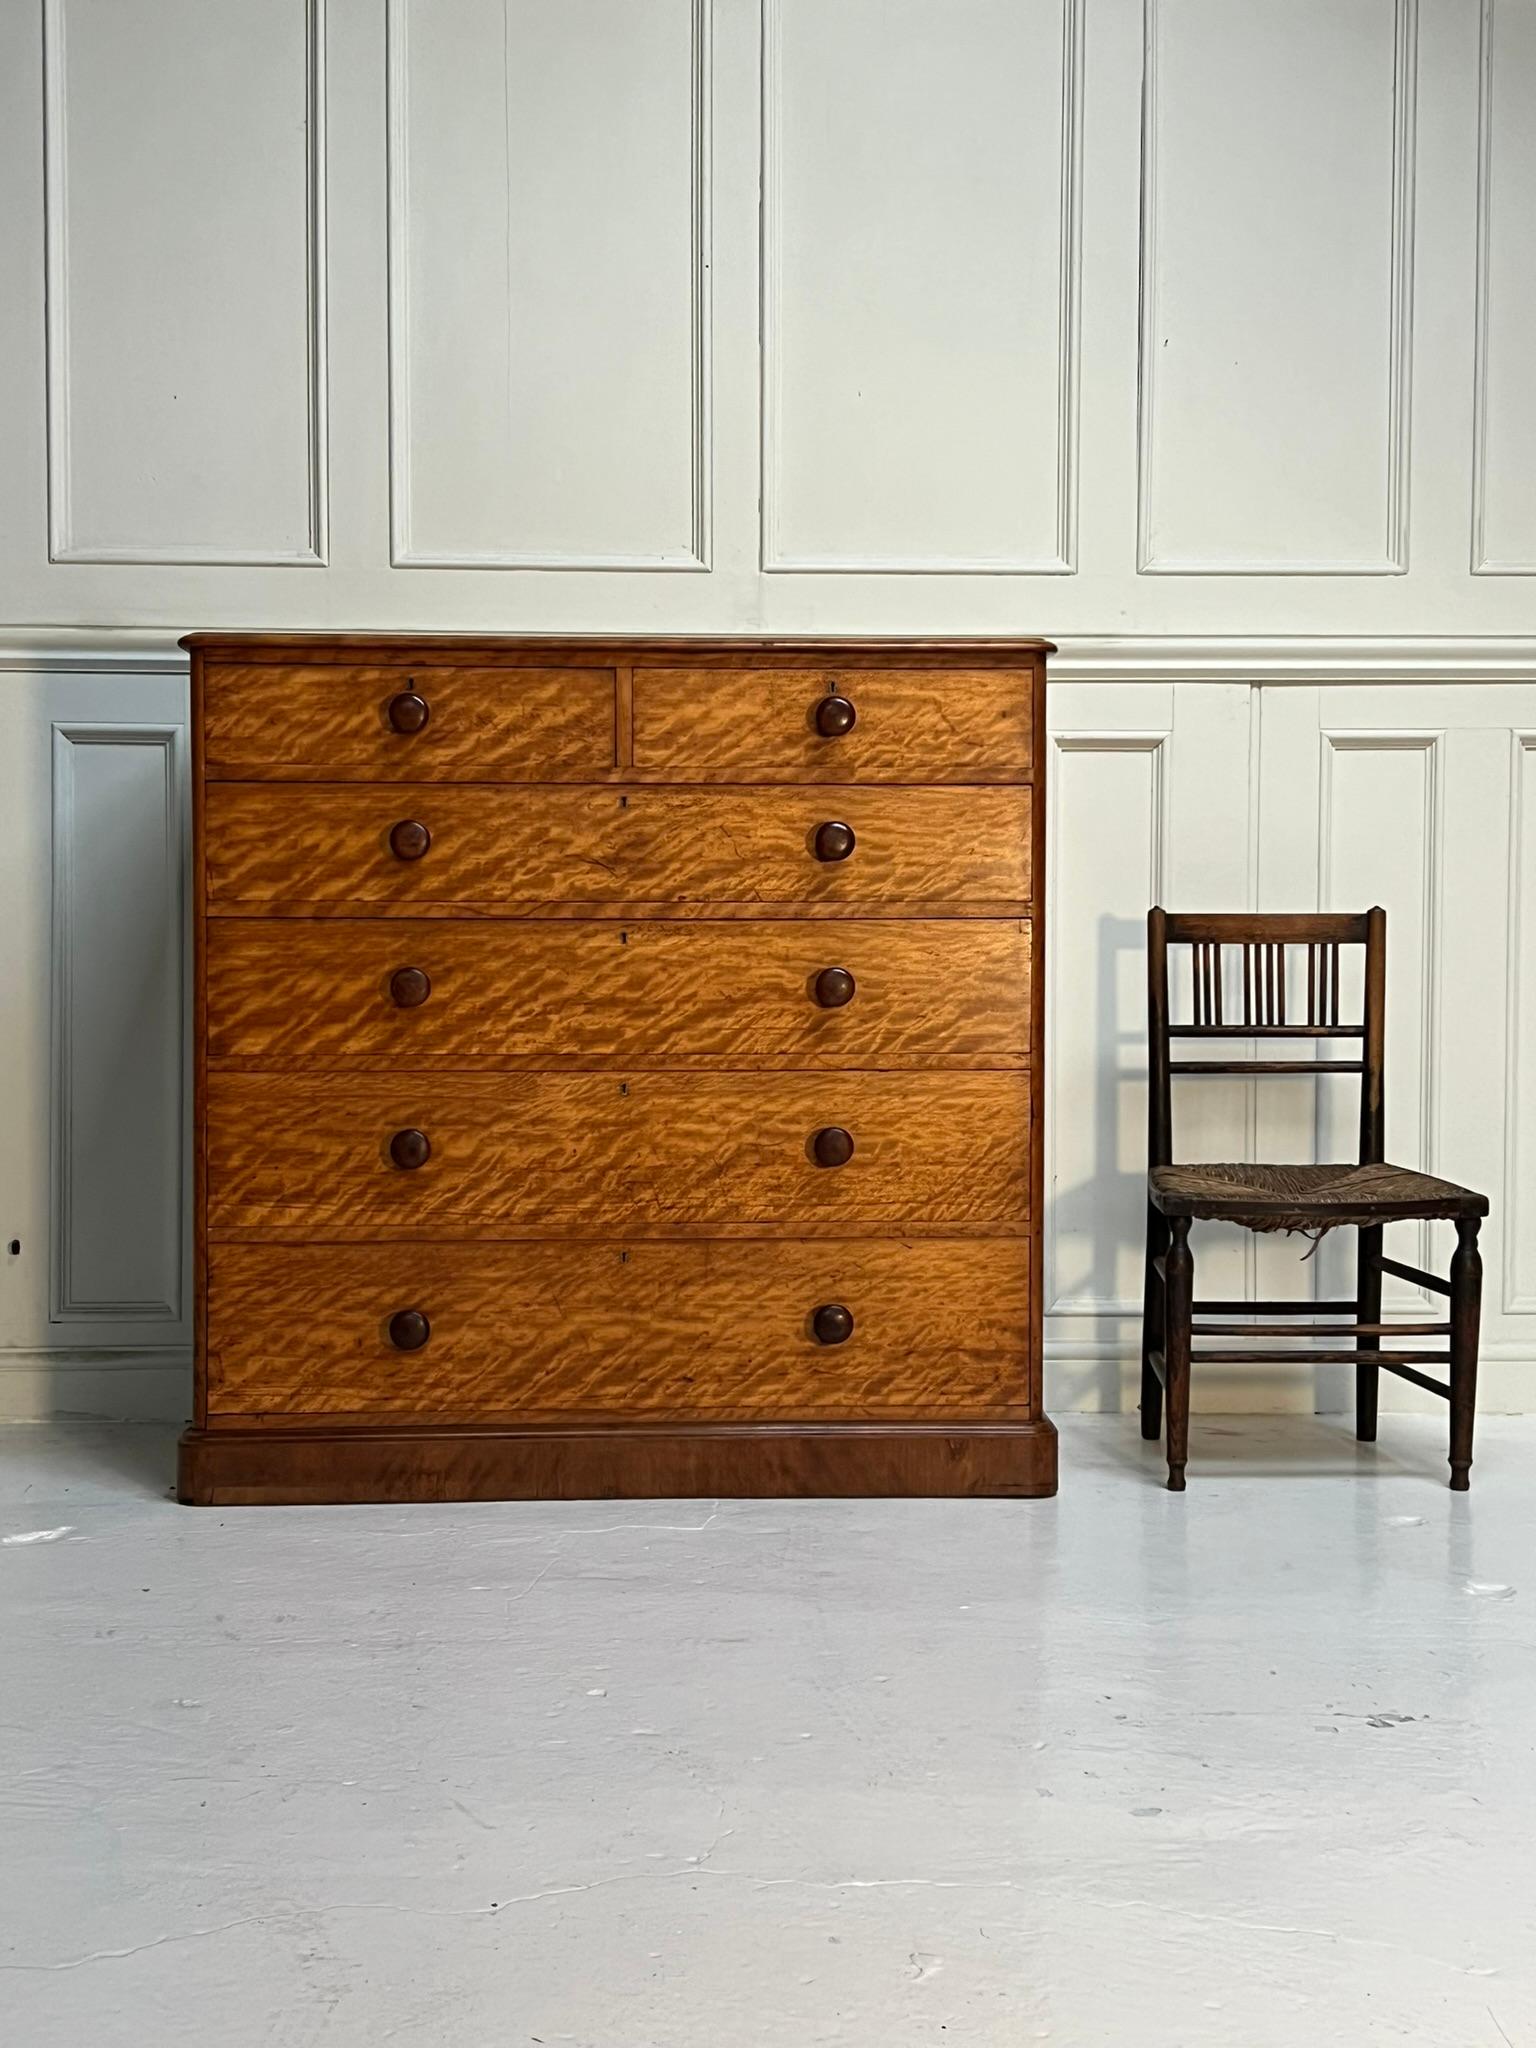 Substantial chest of drawers produced in the late 19th Century by Heal and Son’s.

Generously proportioned and finished in wonderful satin birch veneer.

A quality piece of furniture and certainly a statement piece.

English C1880

Some veneers have